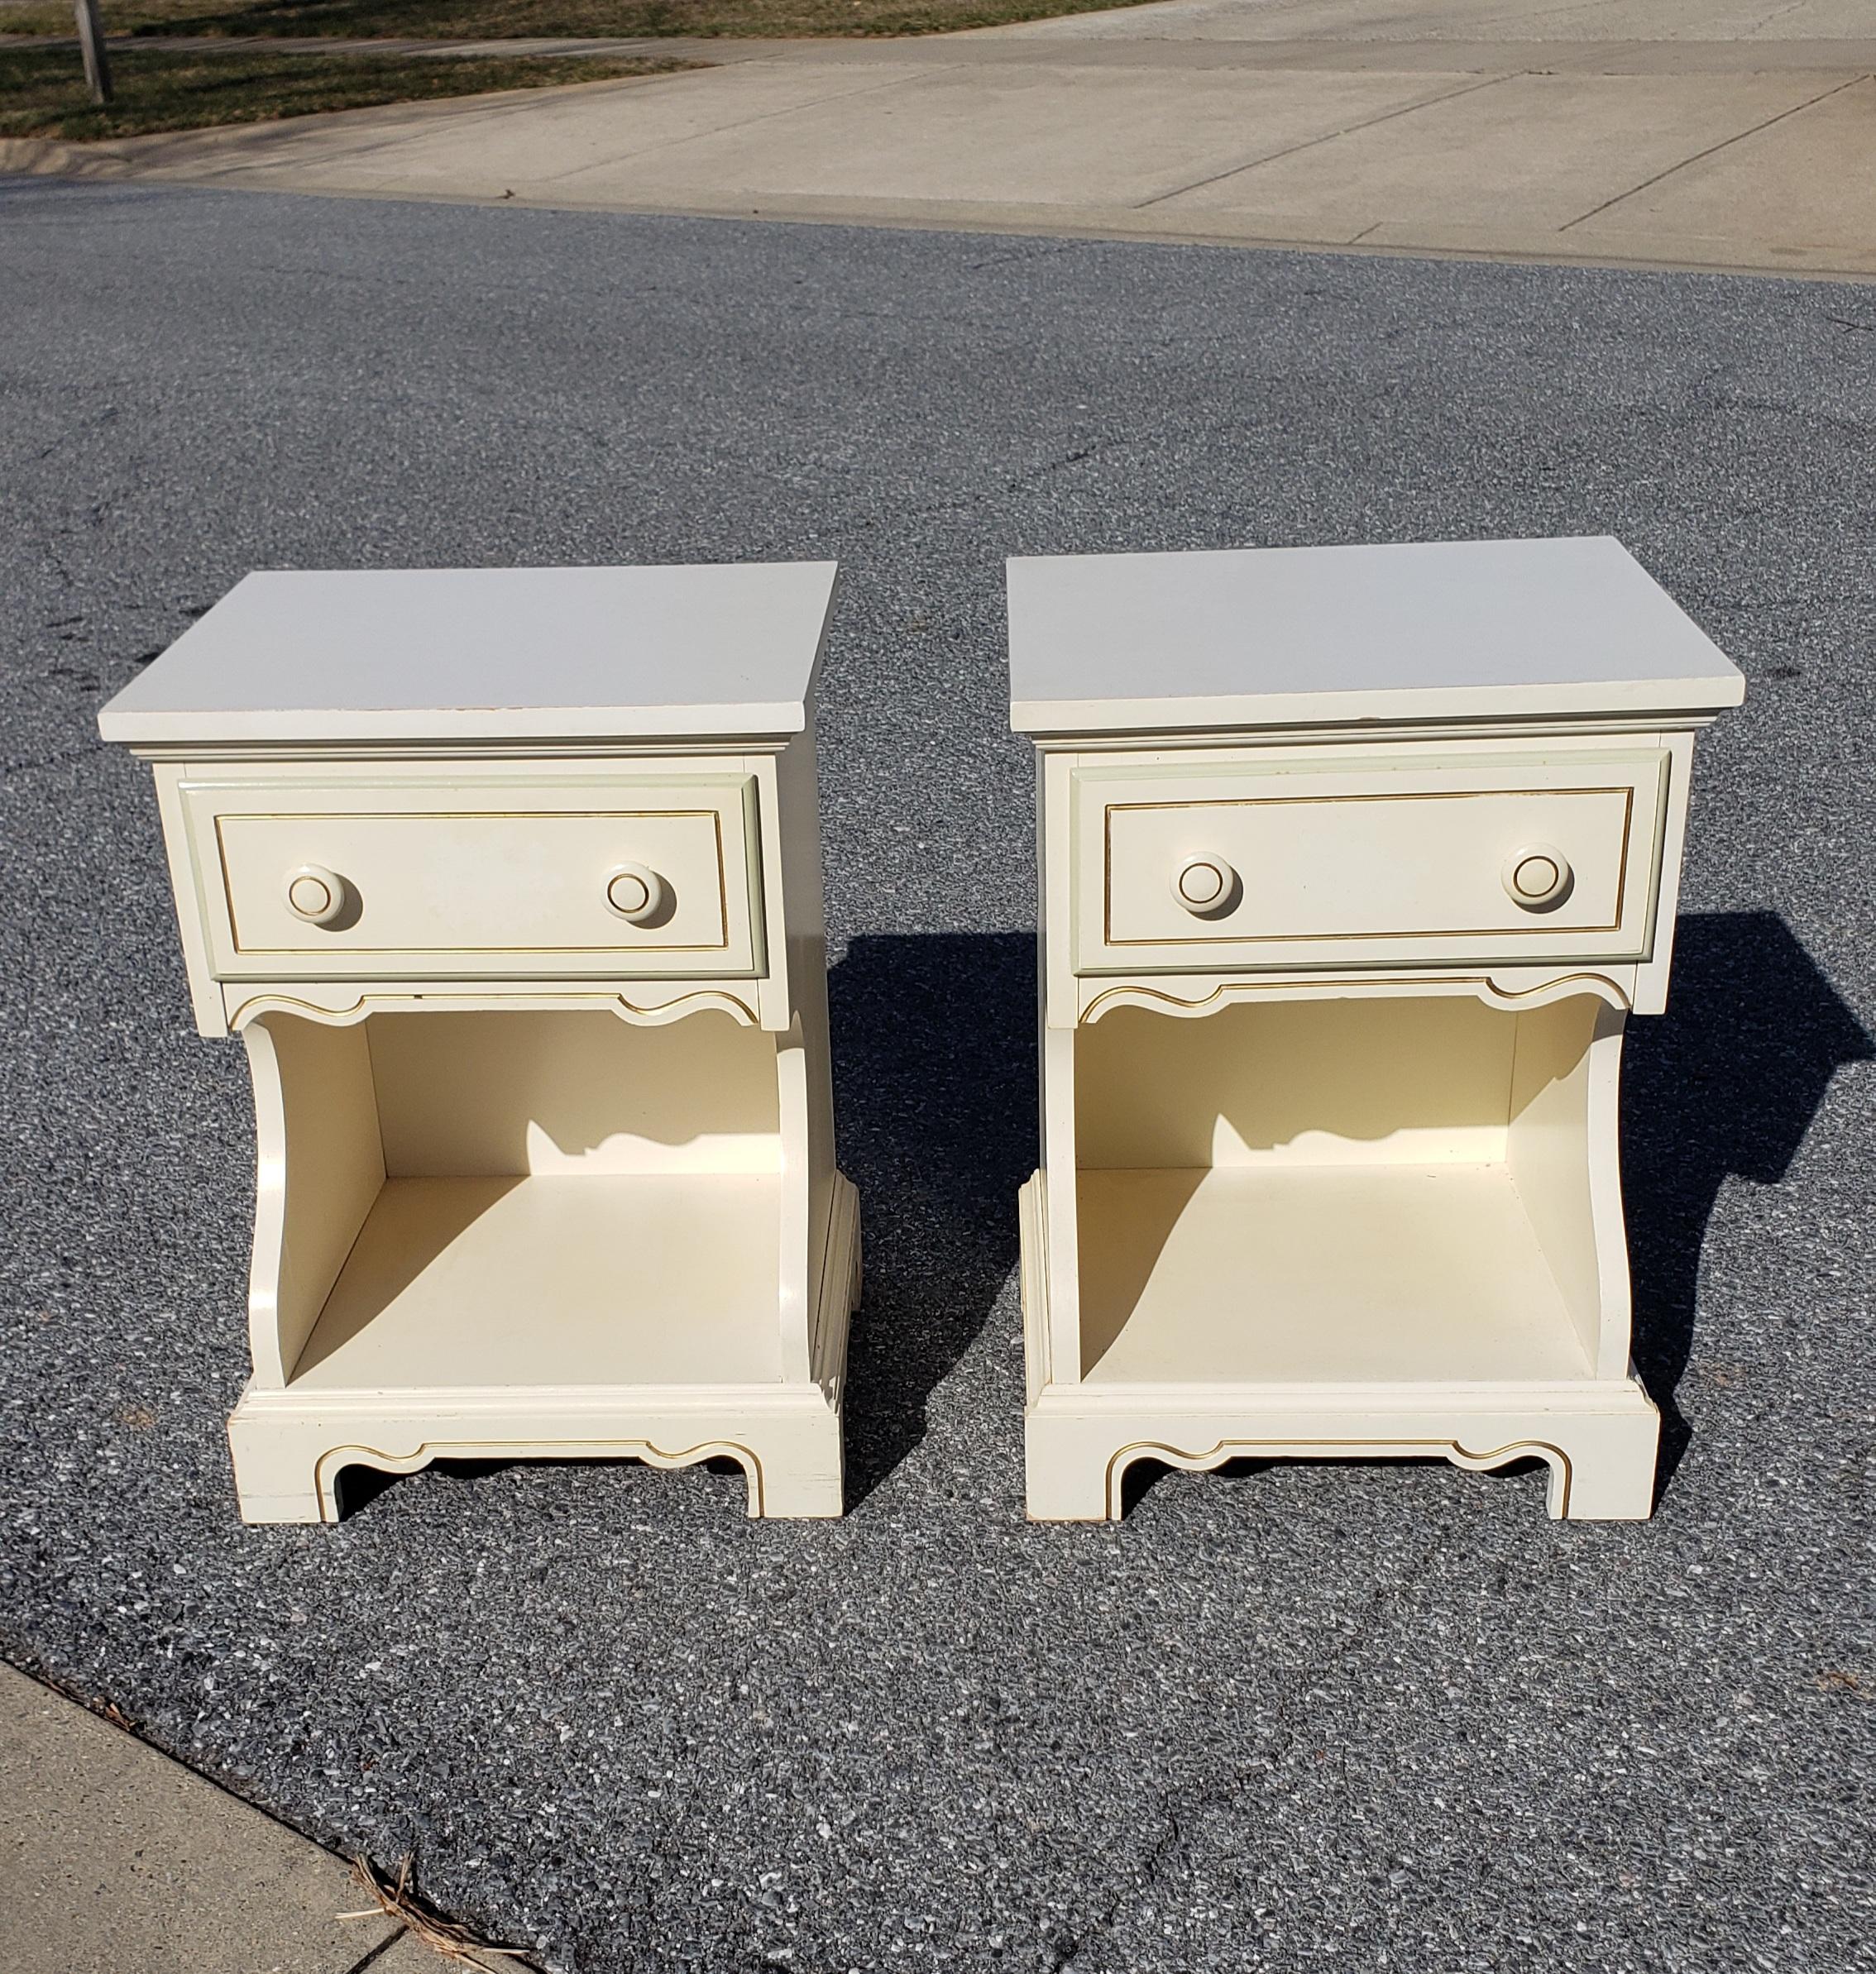 Pair of midcentury Dixie Furniture single drawer laminated top side tables measuring 18